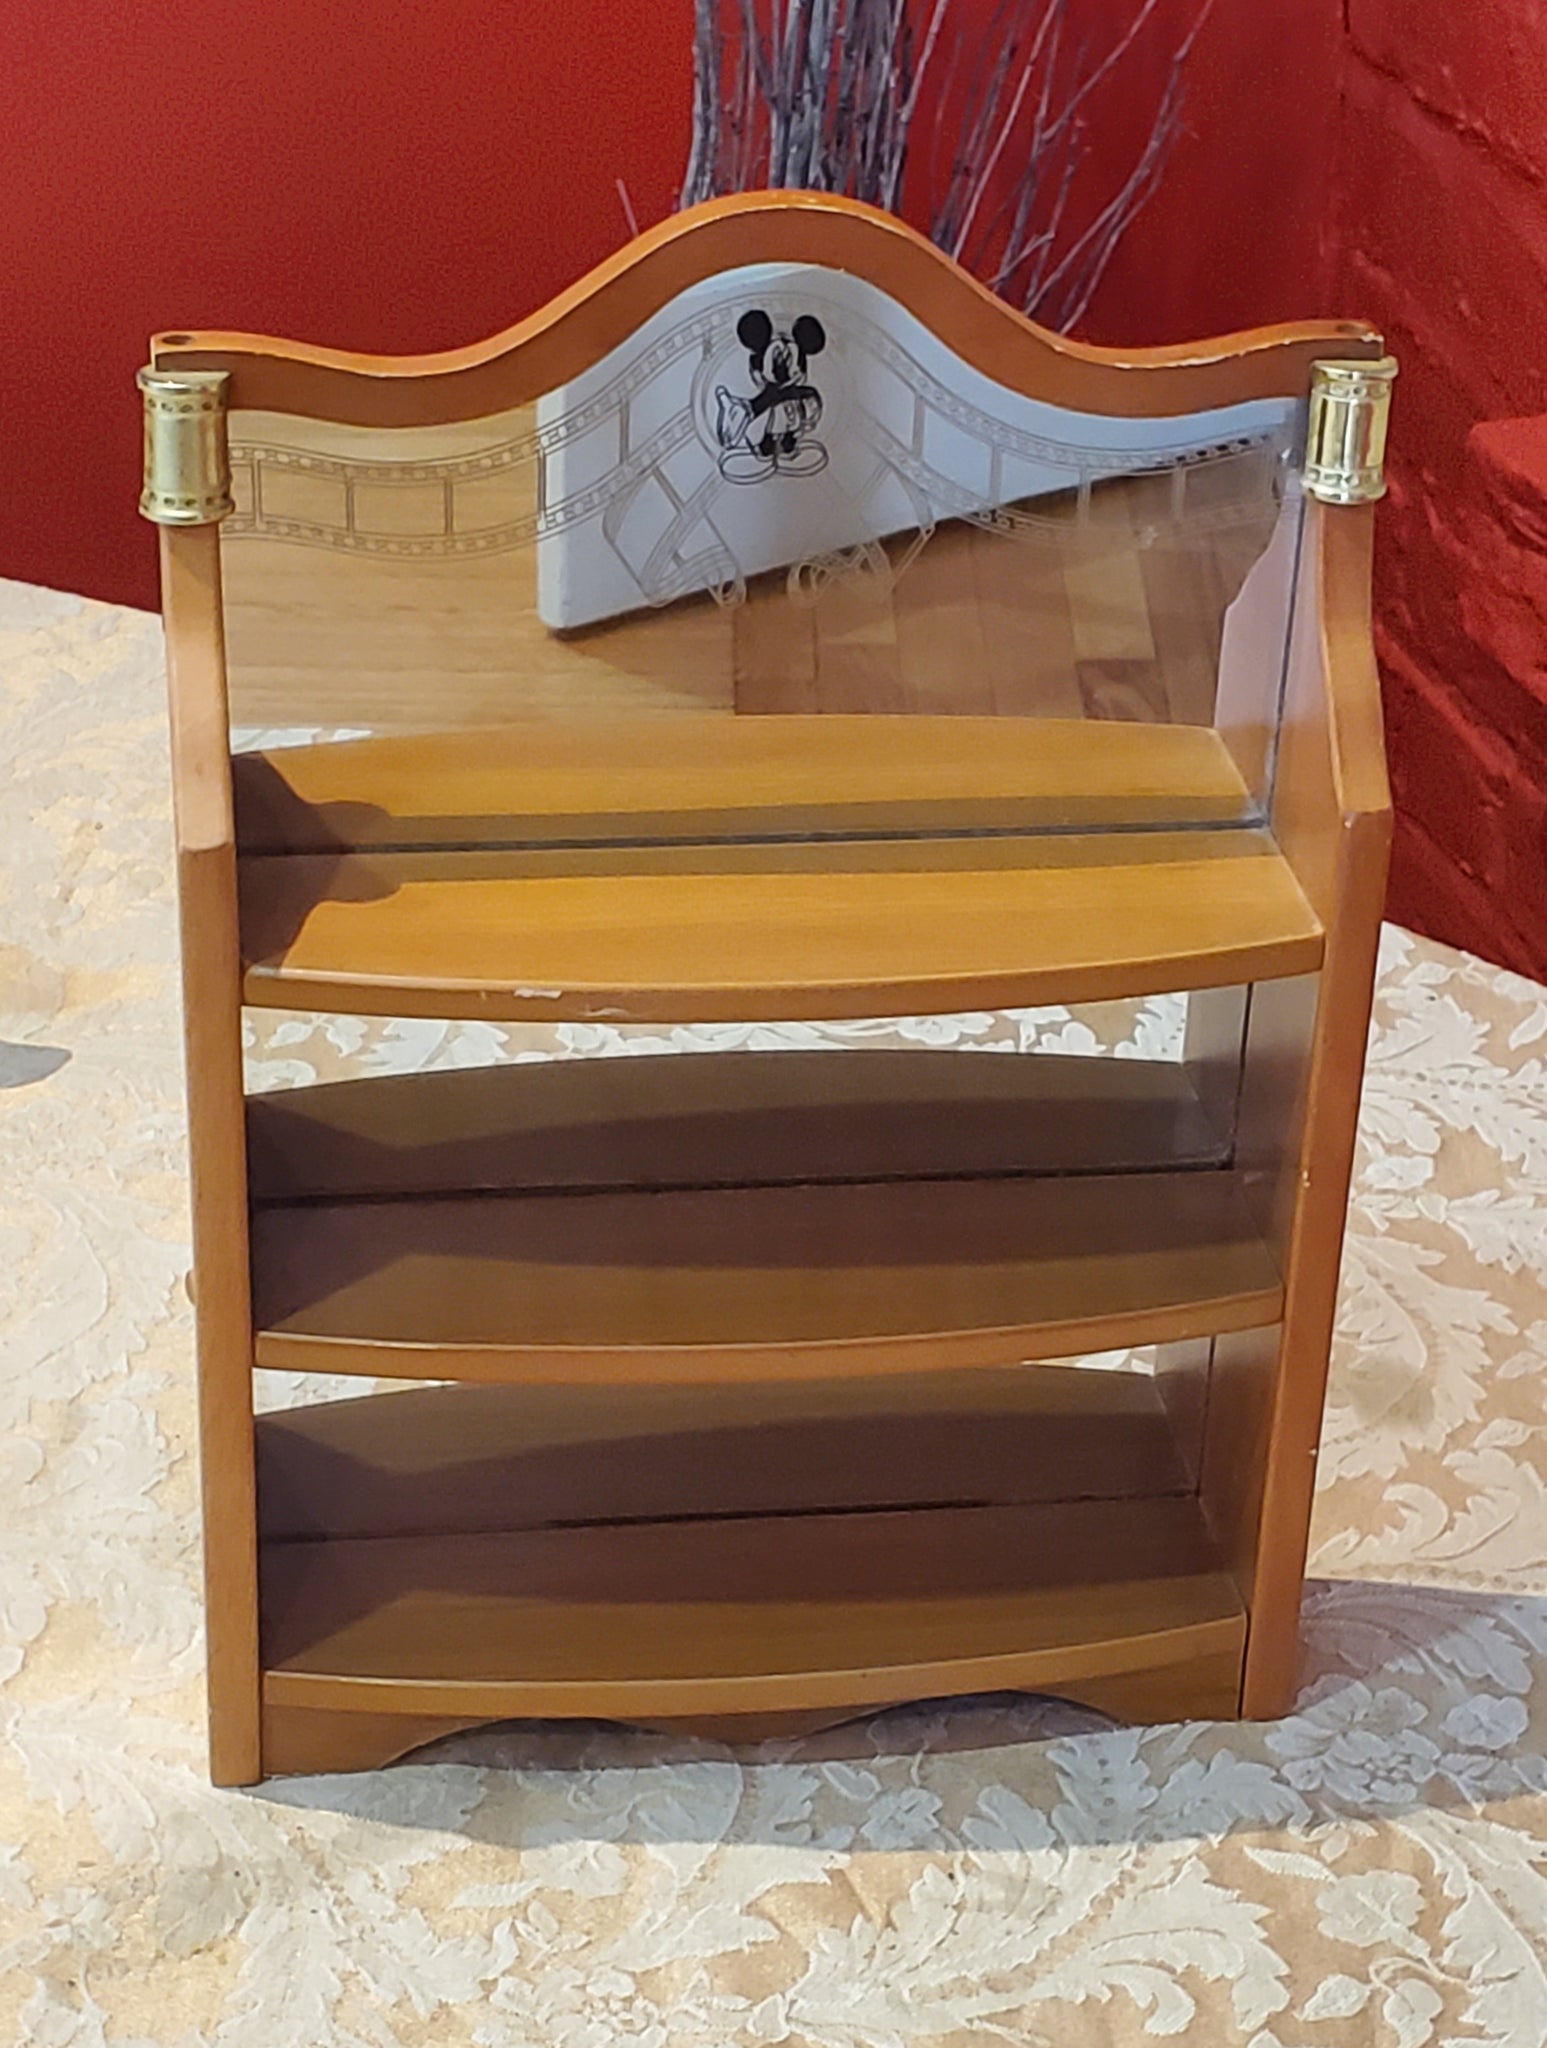 Disney - Vintage Mickey Mouse Wood Mirrored Shelving Display Unit